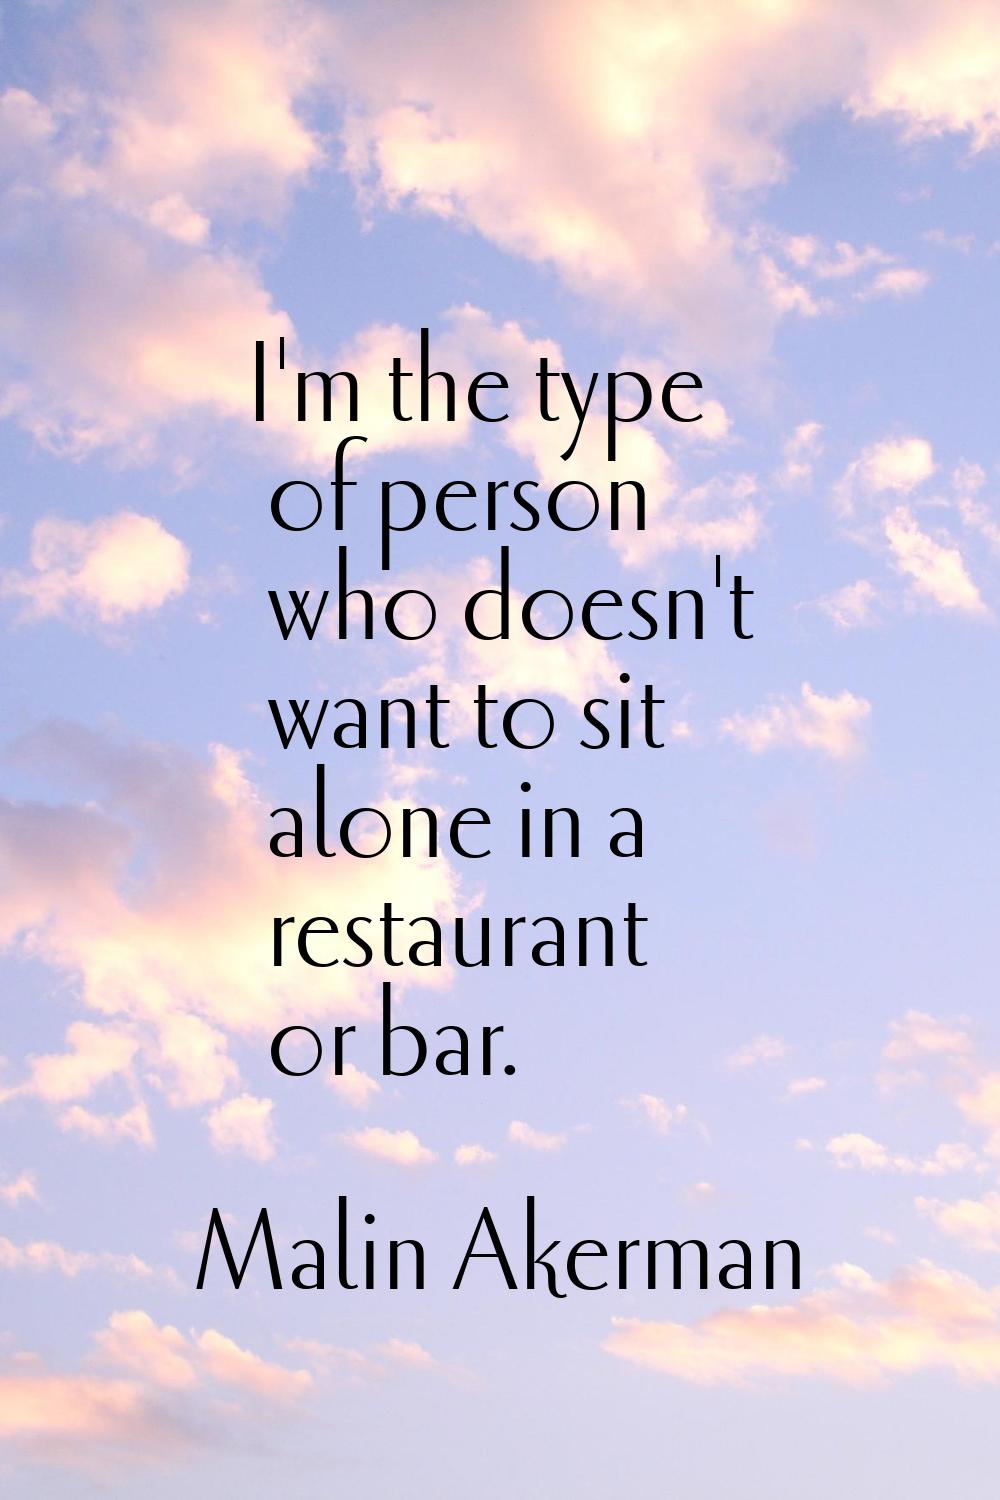 I'm the type of person who doesn't want to sit alone in a restaurant or bar.